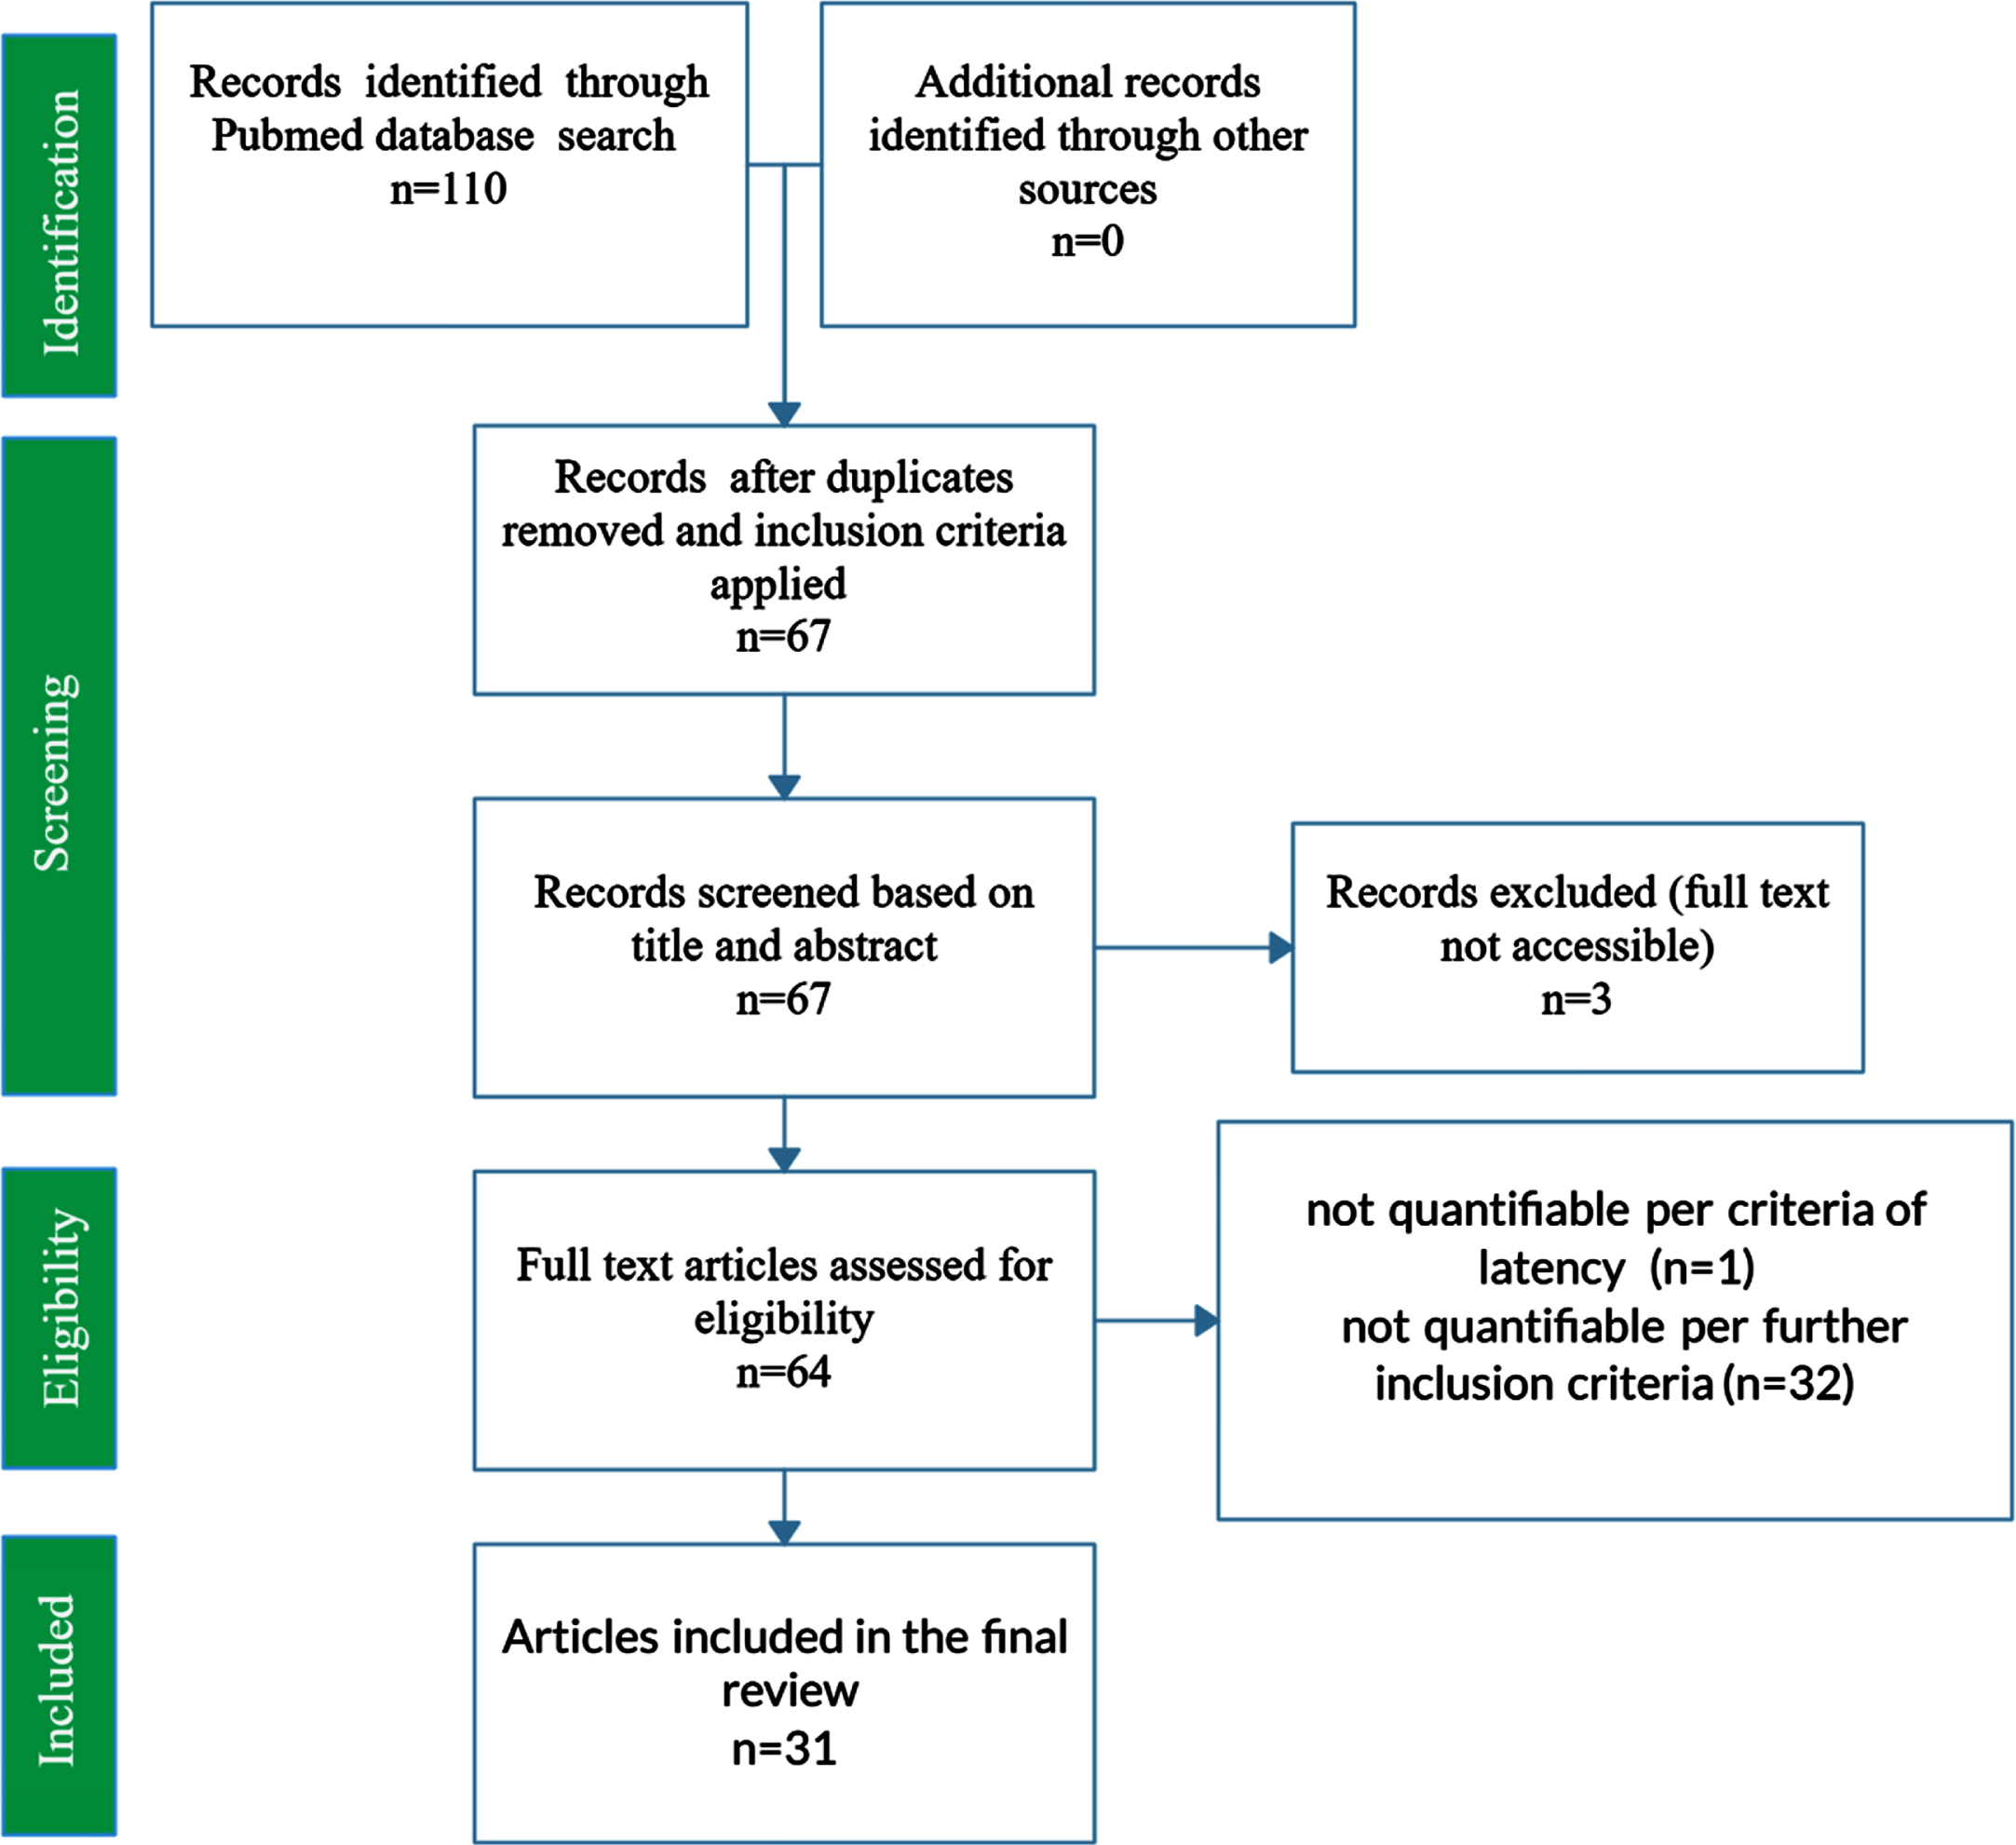 PRISMA Flow Diagram for the systematic review of PubMed articles related to AD APOE. The PRISMA flow diagram represents the systematic review of PubMed articles and the compilation and curation of journal article data into a manually constructed relational database. The final set of included studies comprised 31 journal articles and 3,045 mice. Features assessed include mouse genotype (wild type, APOE2 knock-in, APOE3 knock-in, APOE4 knock-in, APOE knock-out); type of external APOE modulatory treatment and its intended impact on the underlying etiology and corresponding cognition (positive treatment, negative treatment, untreated); mouse age (in days); and mouse gender (male, female, or mixed/unknown).